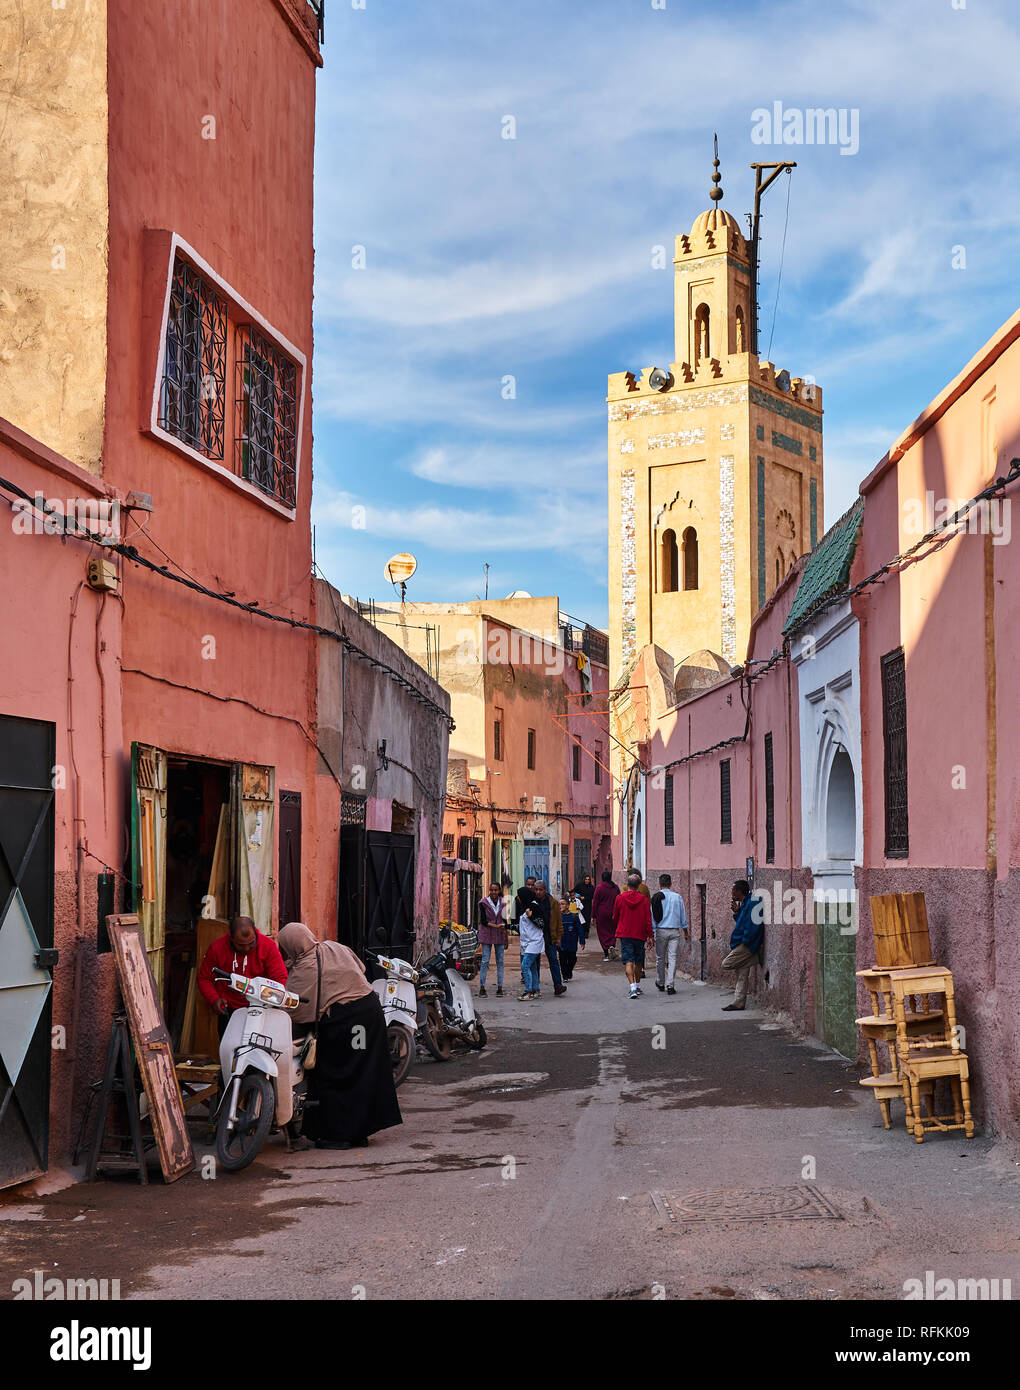 Scene of a traditional small street of Marrakesh / Marrakech, Morocco. Stock Photo